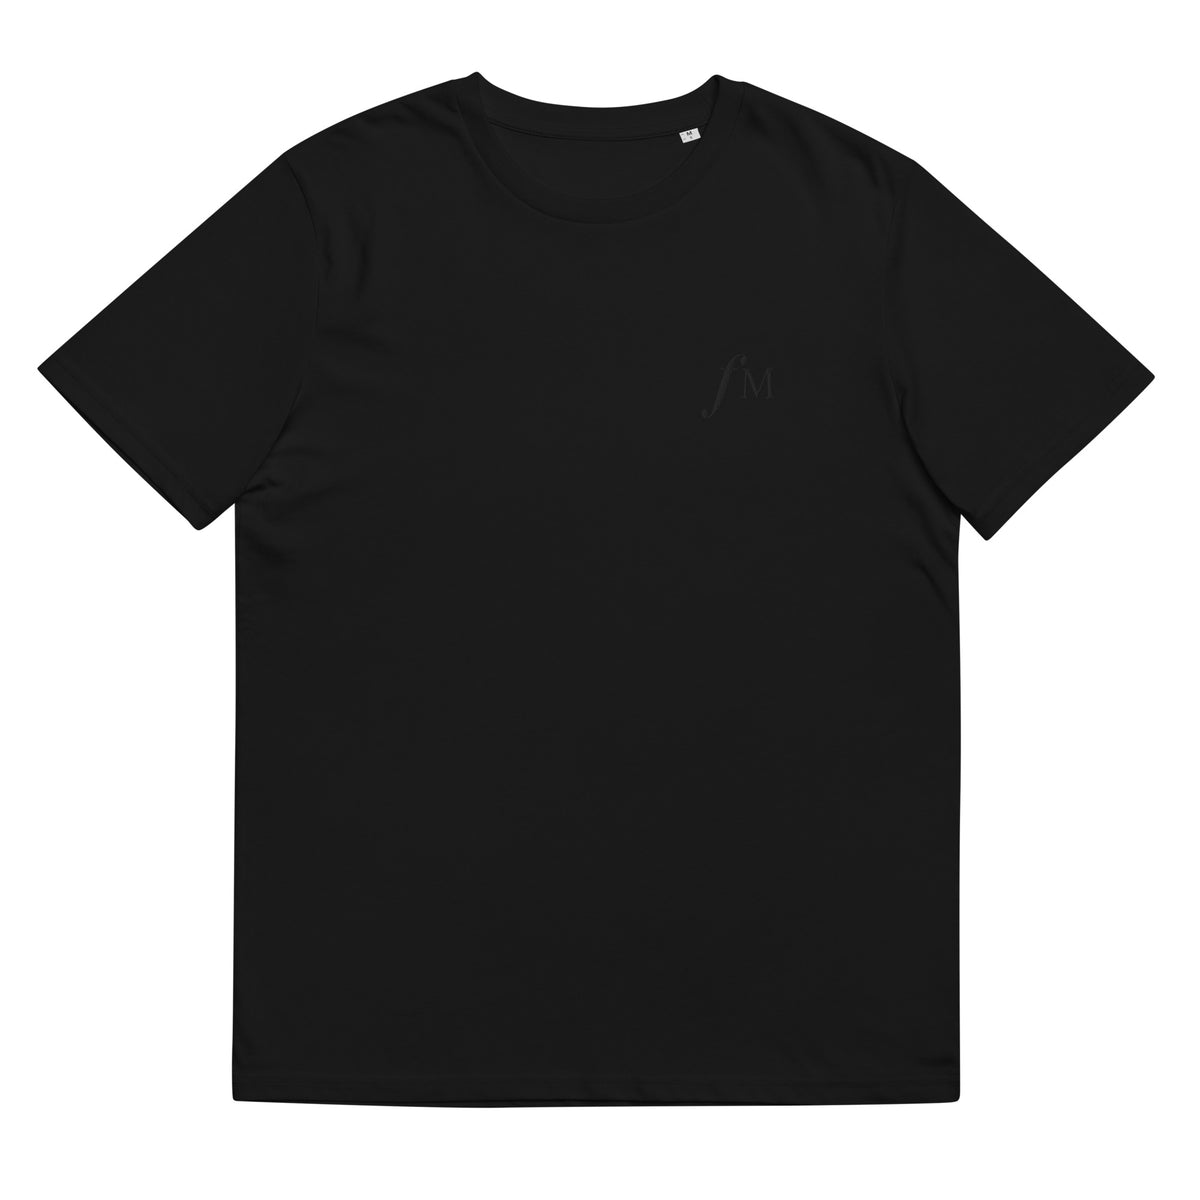 Classic FM Embroidered Black T-Shirt